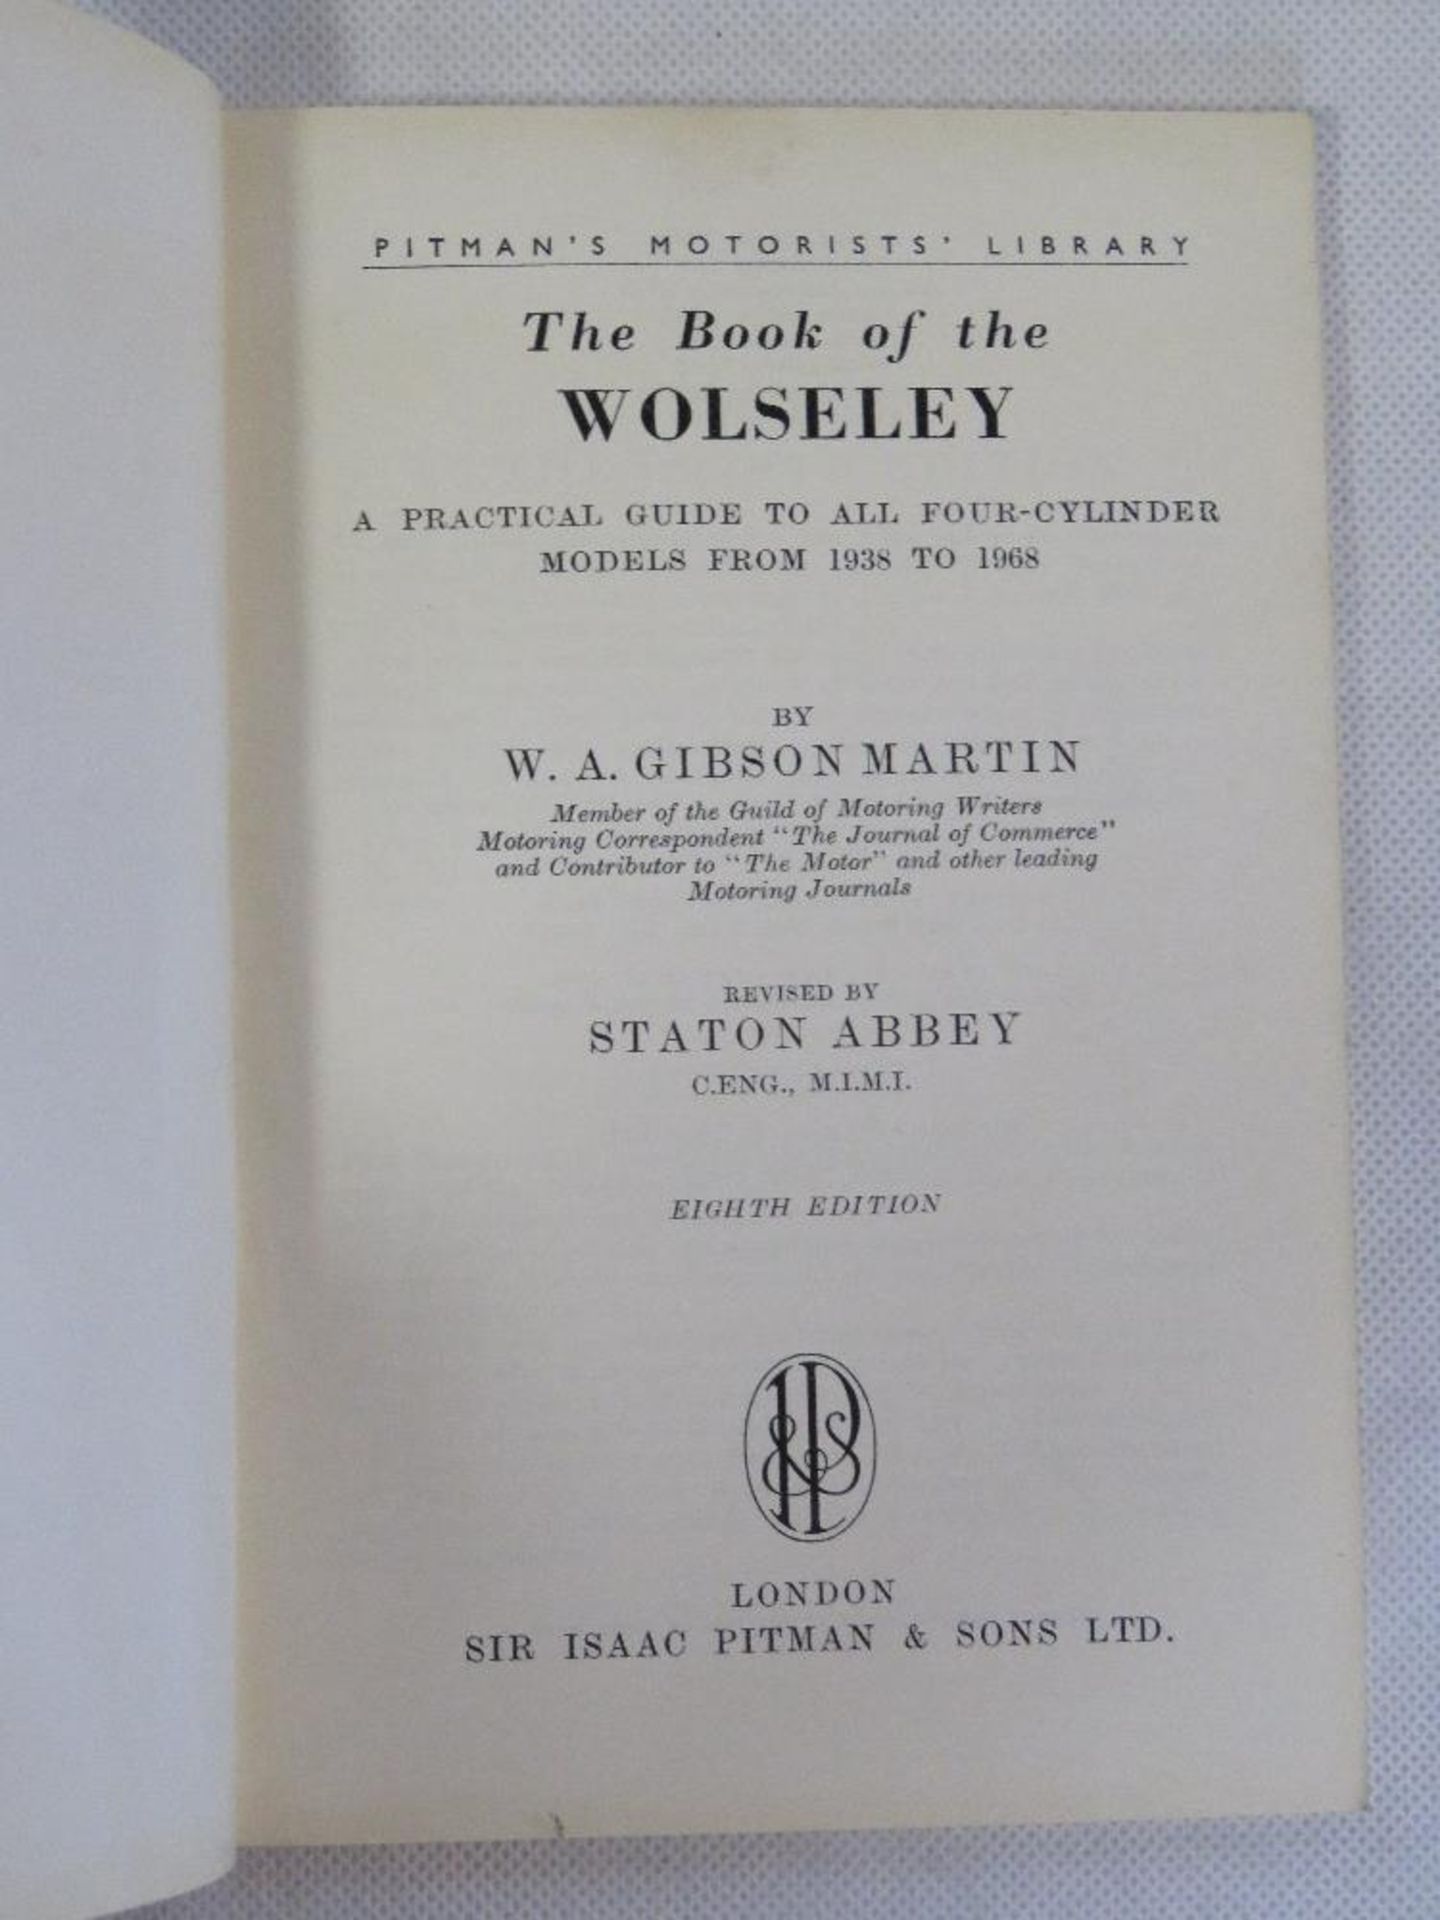 The Book of the Wolseley by W.A. Gibson Martin for Pitmans motorists Library, eight edition. - Image 2 of 2